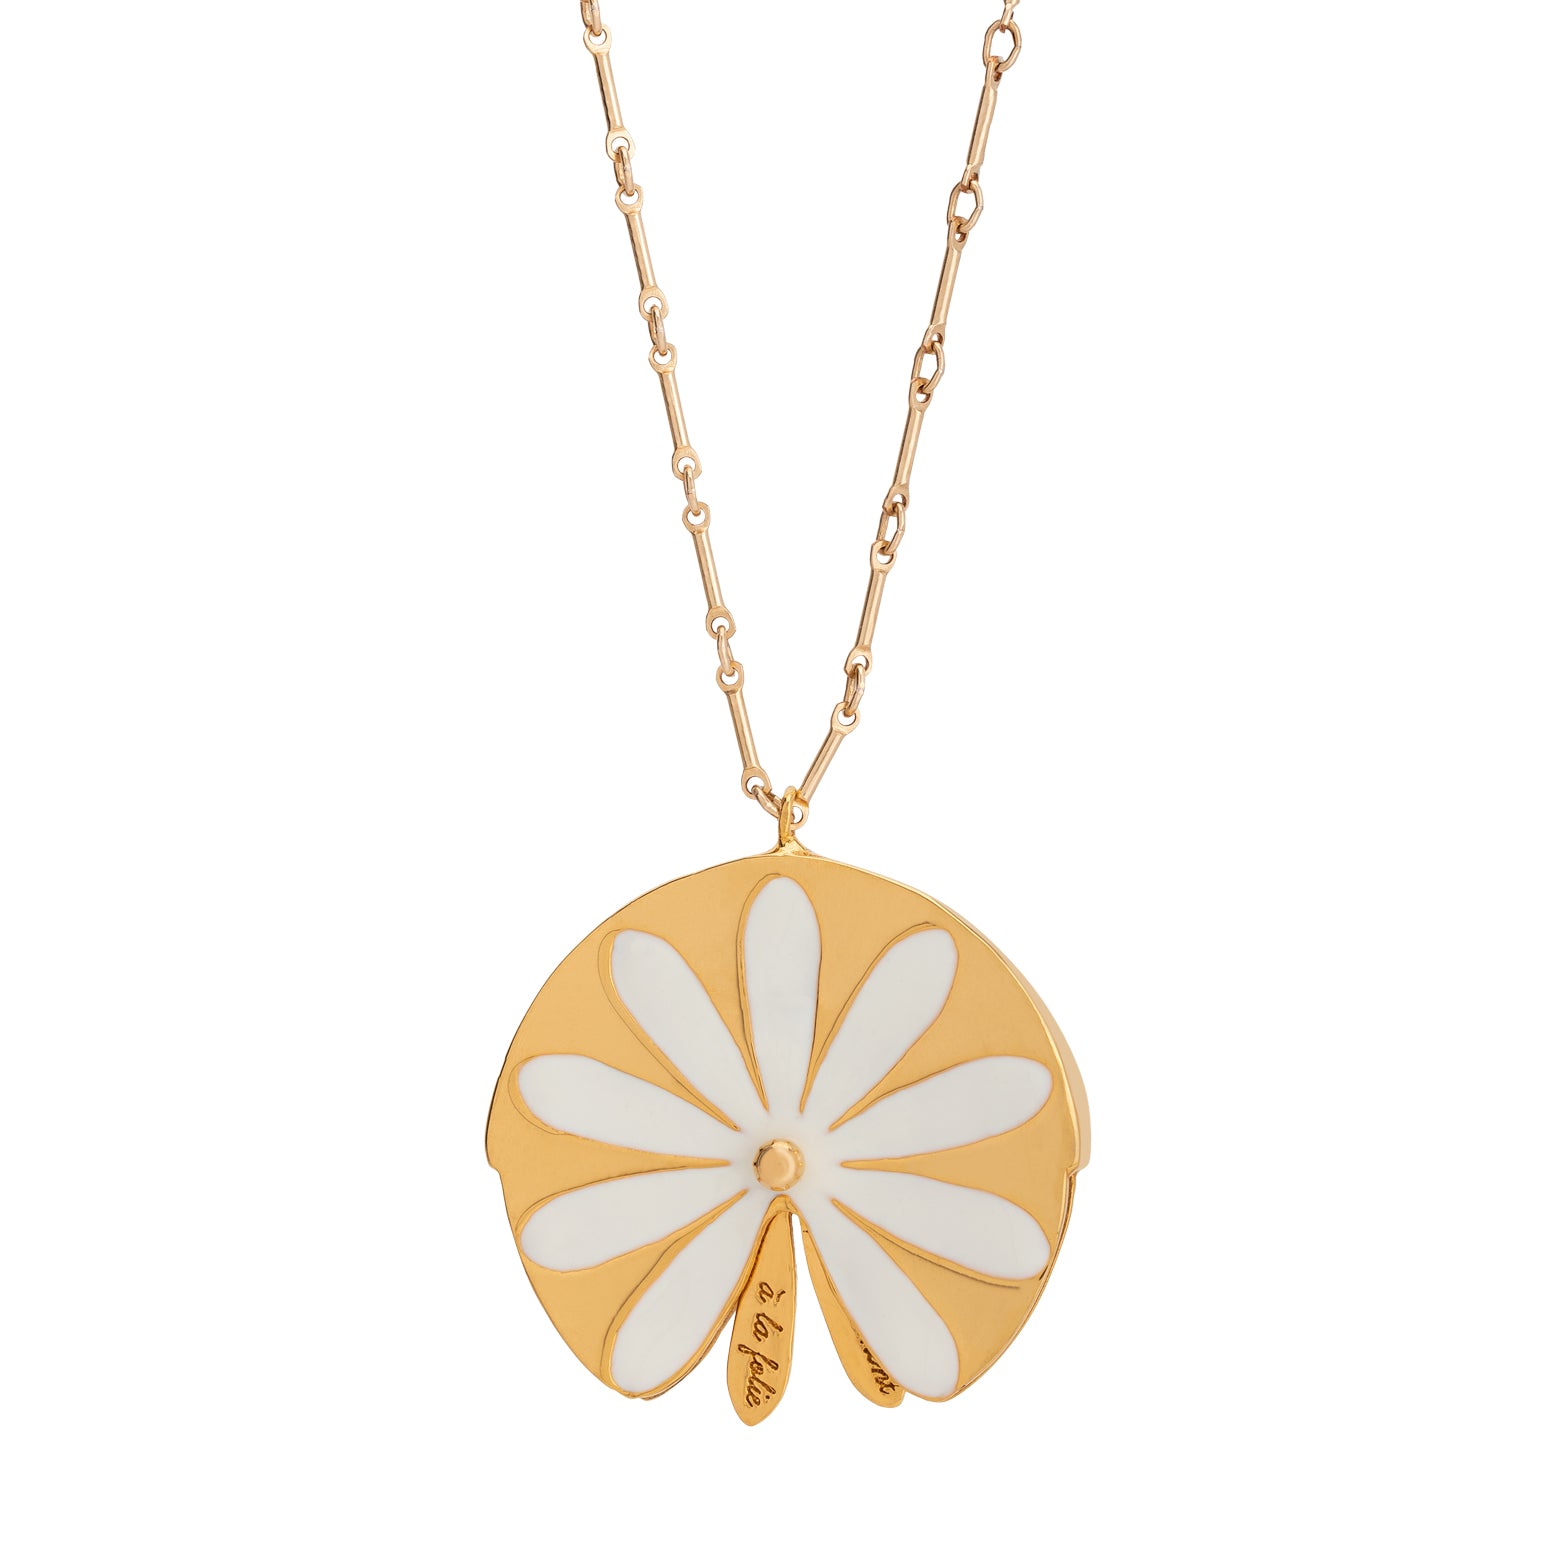 daisy necklace in 14k gold filled white enamel and ballpin center